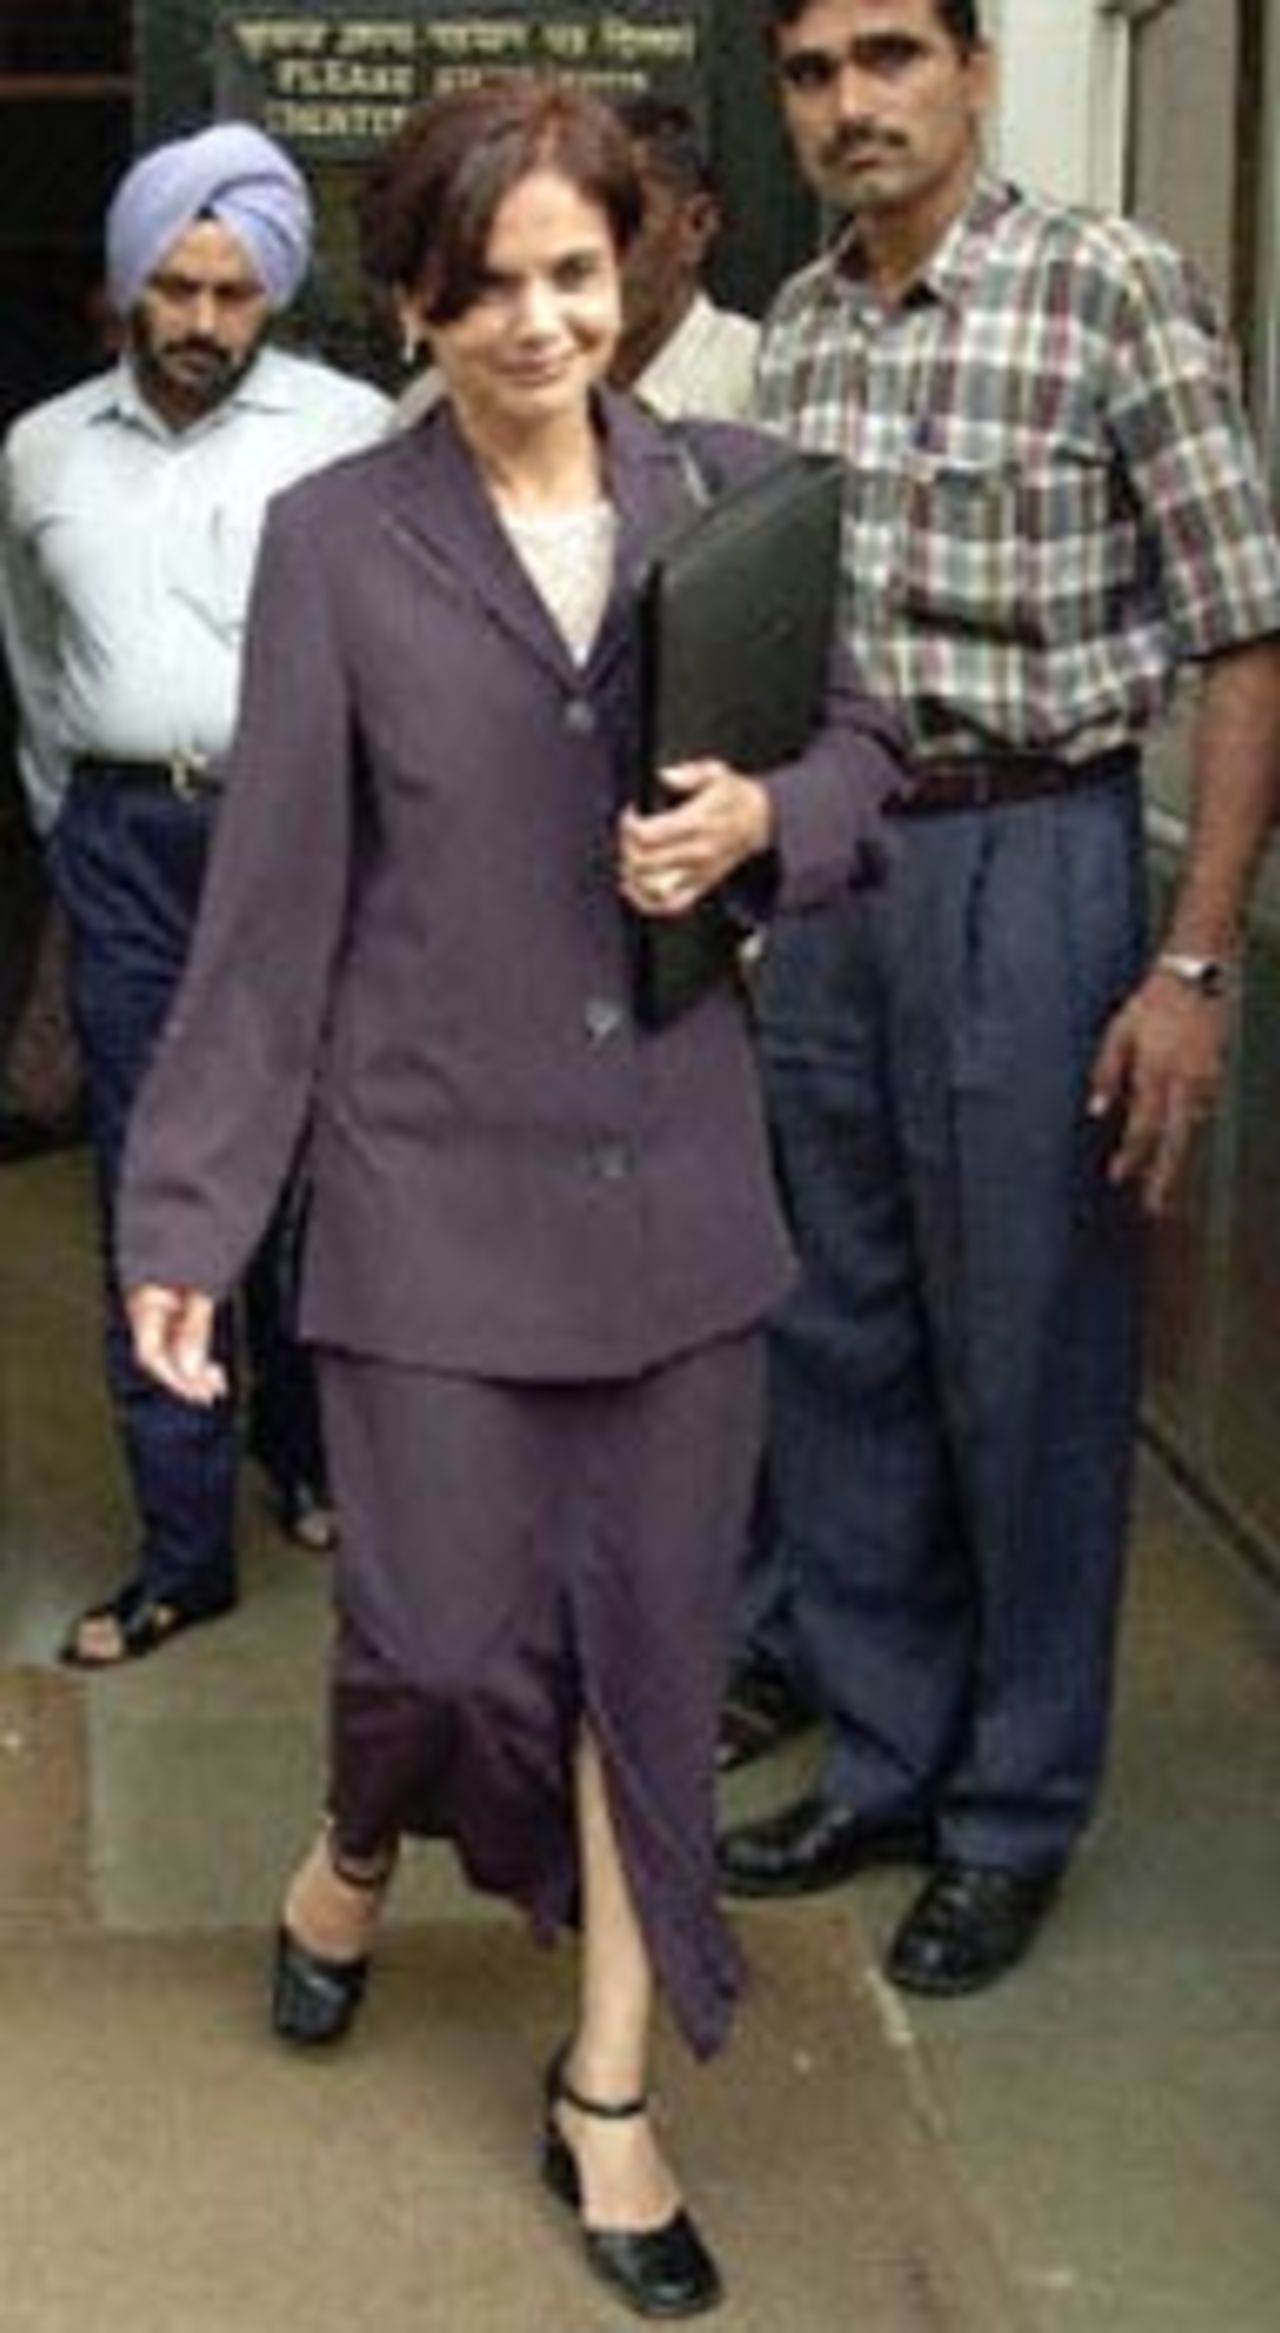 Shamila Batohi (C), South Africa's chief prosecutor in the King Commission of inquiry into corruption in Cricket, walks out of the Central Bureau of Investigation (CBI) office in New Delhi as bureau officials look on, 20 September 2000. Batohi, said though she didn't manage to get hold of the 'Cronjie tapes' which allegedly details disgraced South African skipper Hansie Cronje's conversations with an Indian bookie, she did get hold of the transcripts from Indian officials.